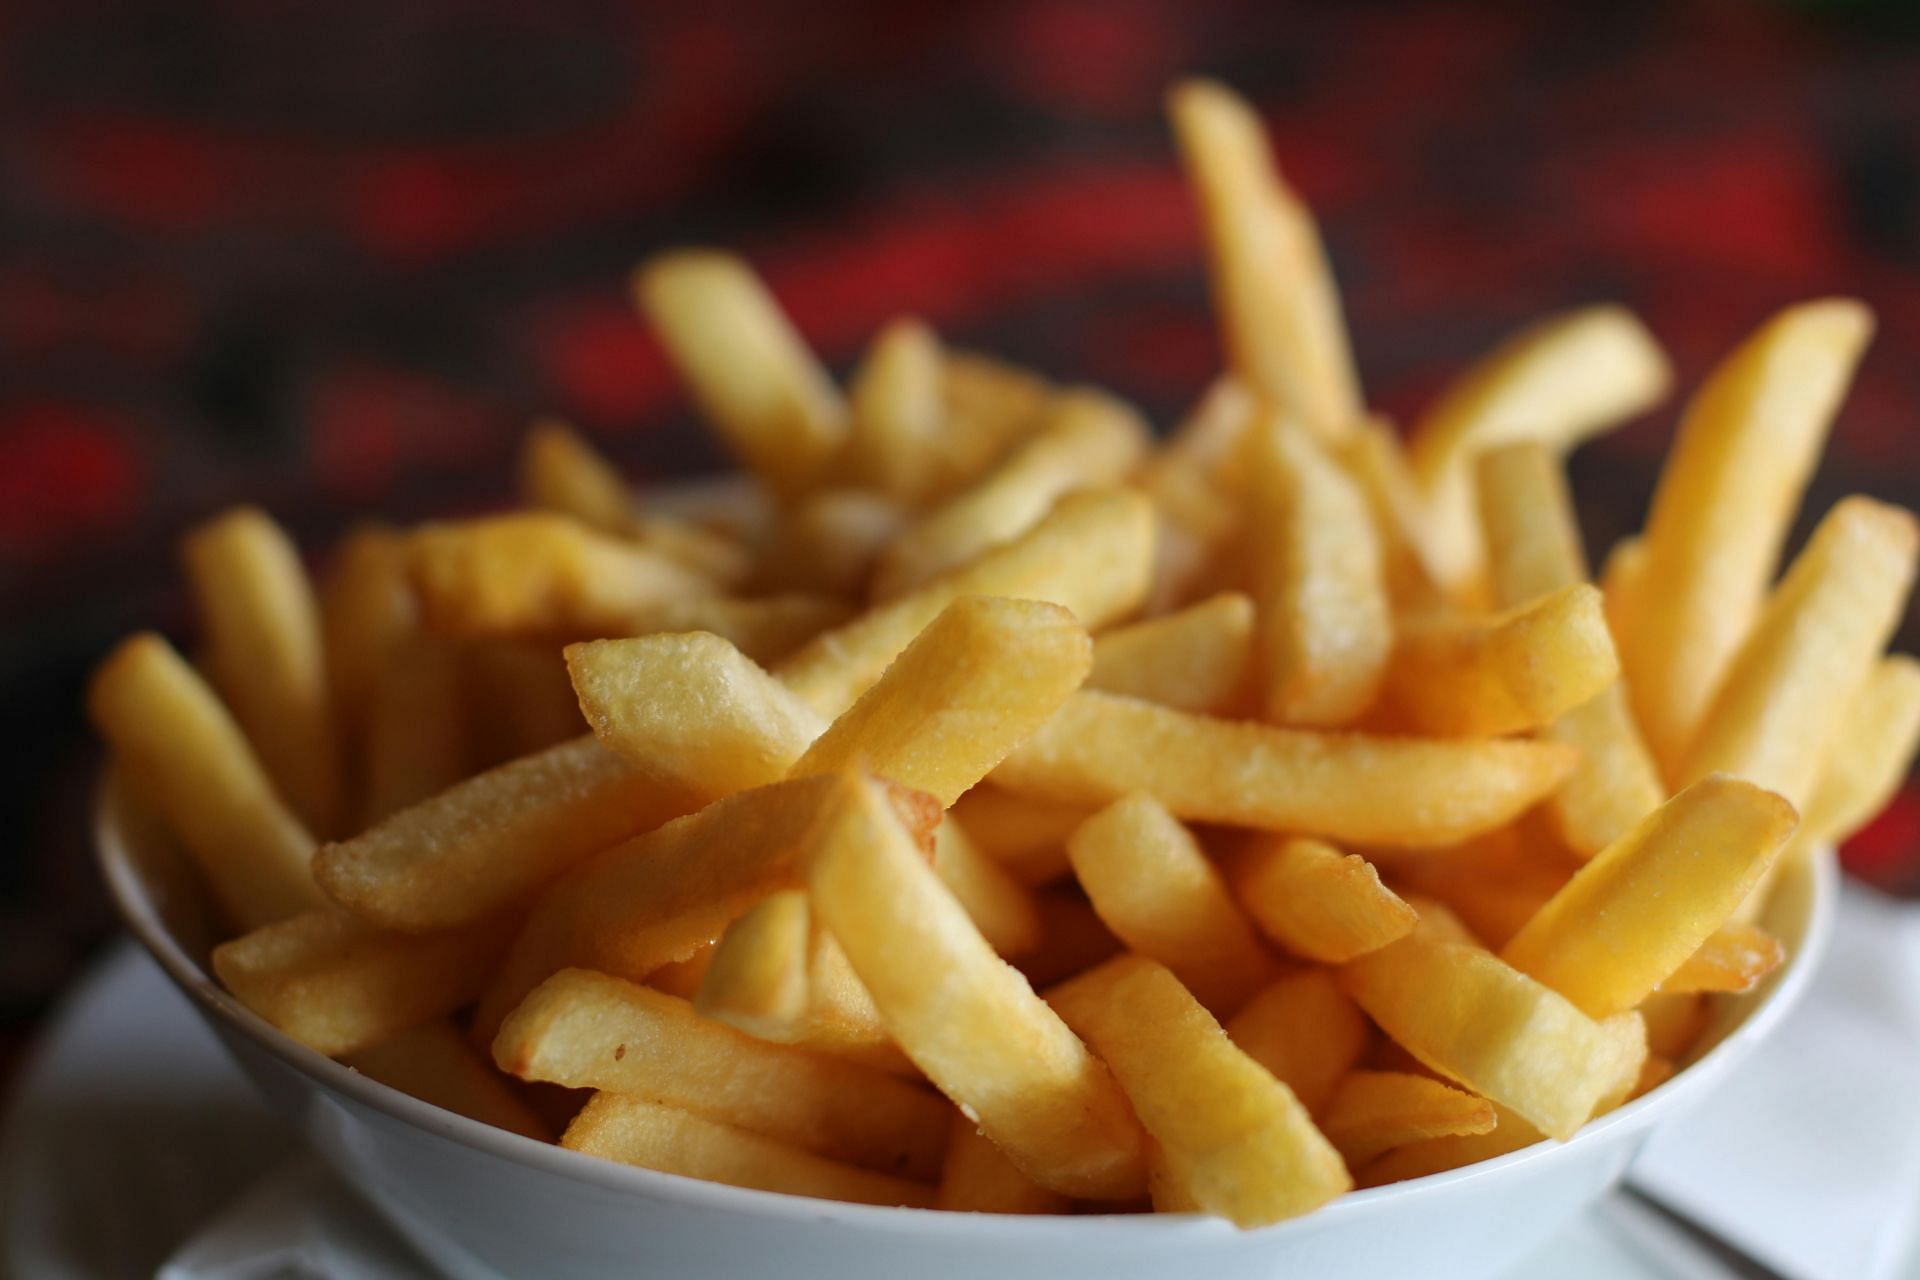 Disadvantages of fries as hangover food (image sourced via Pexels / Photo by Dzenina)